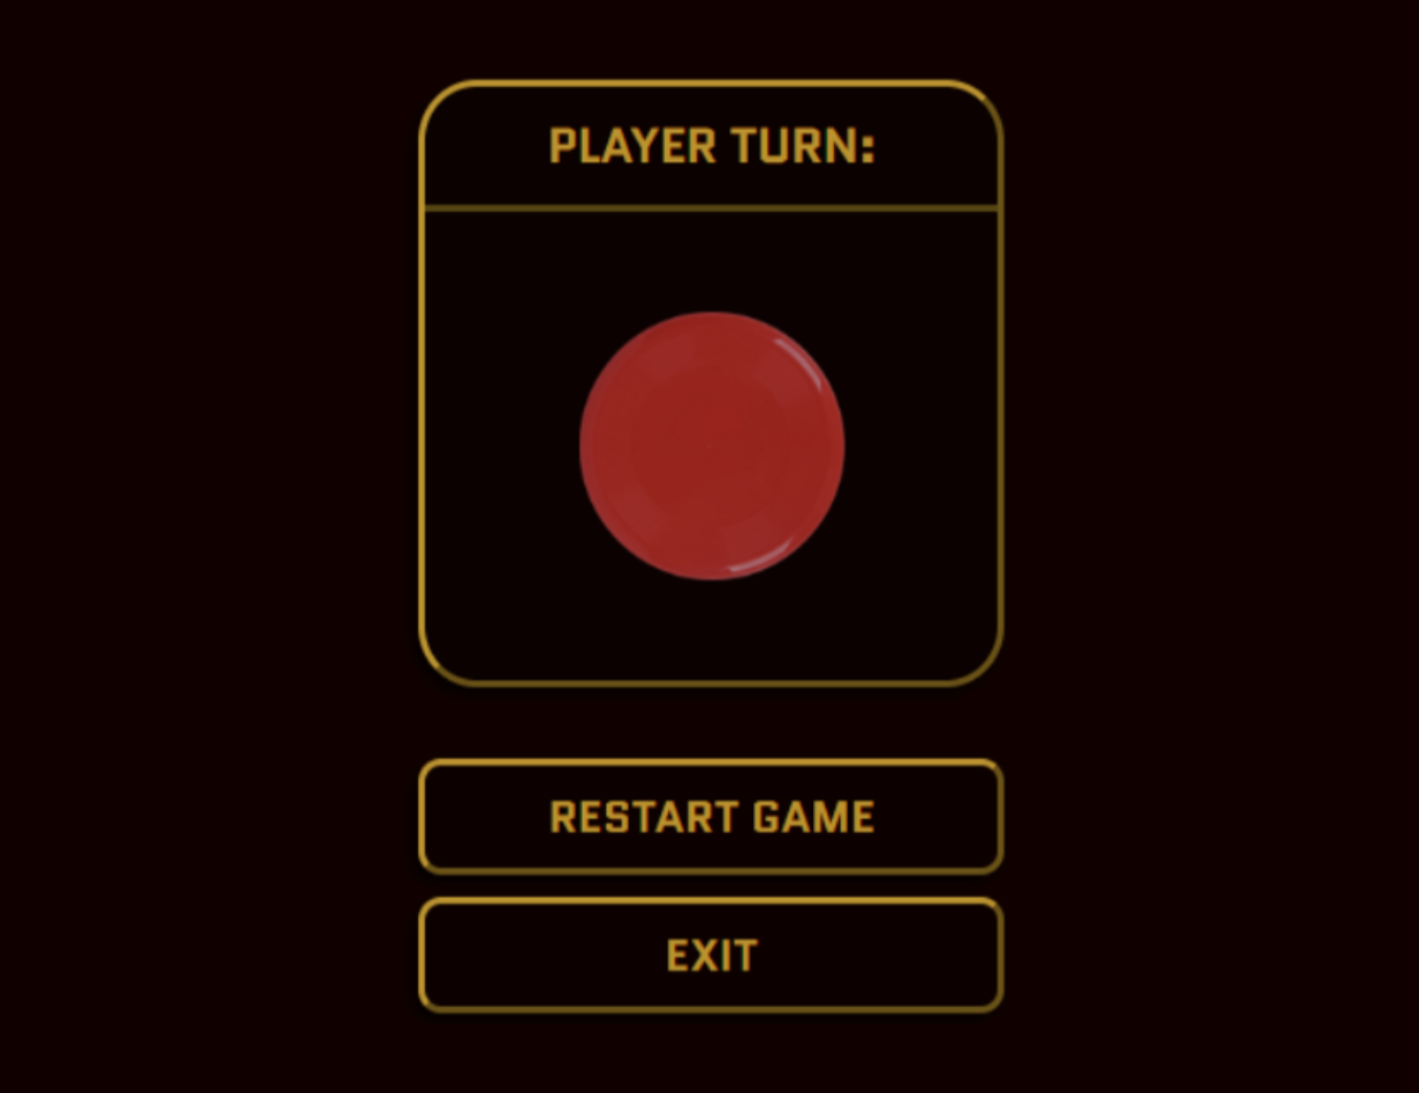 Interface displaying the red player's turn and buttons to restart the game and exit